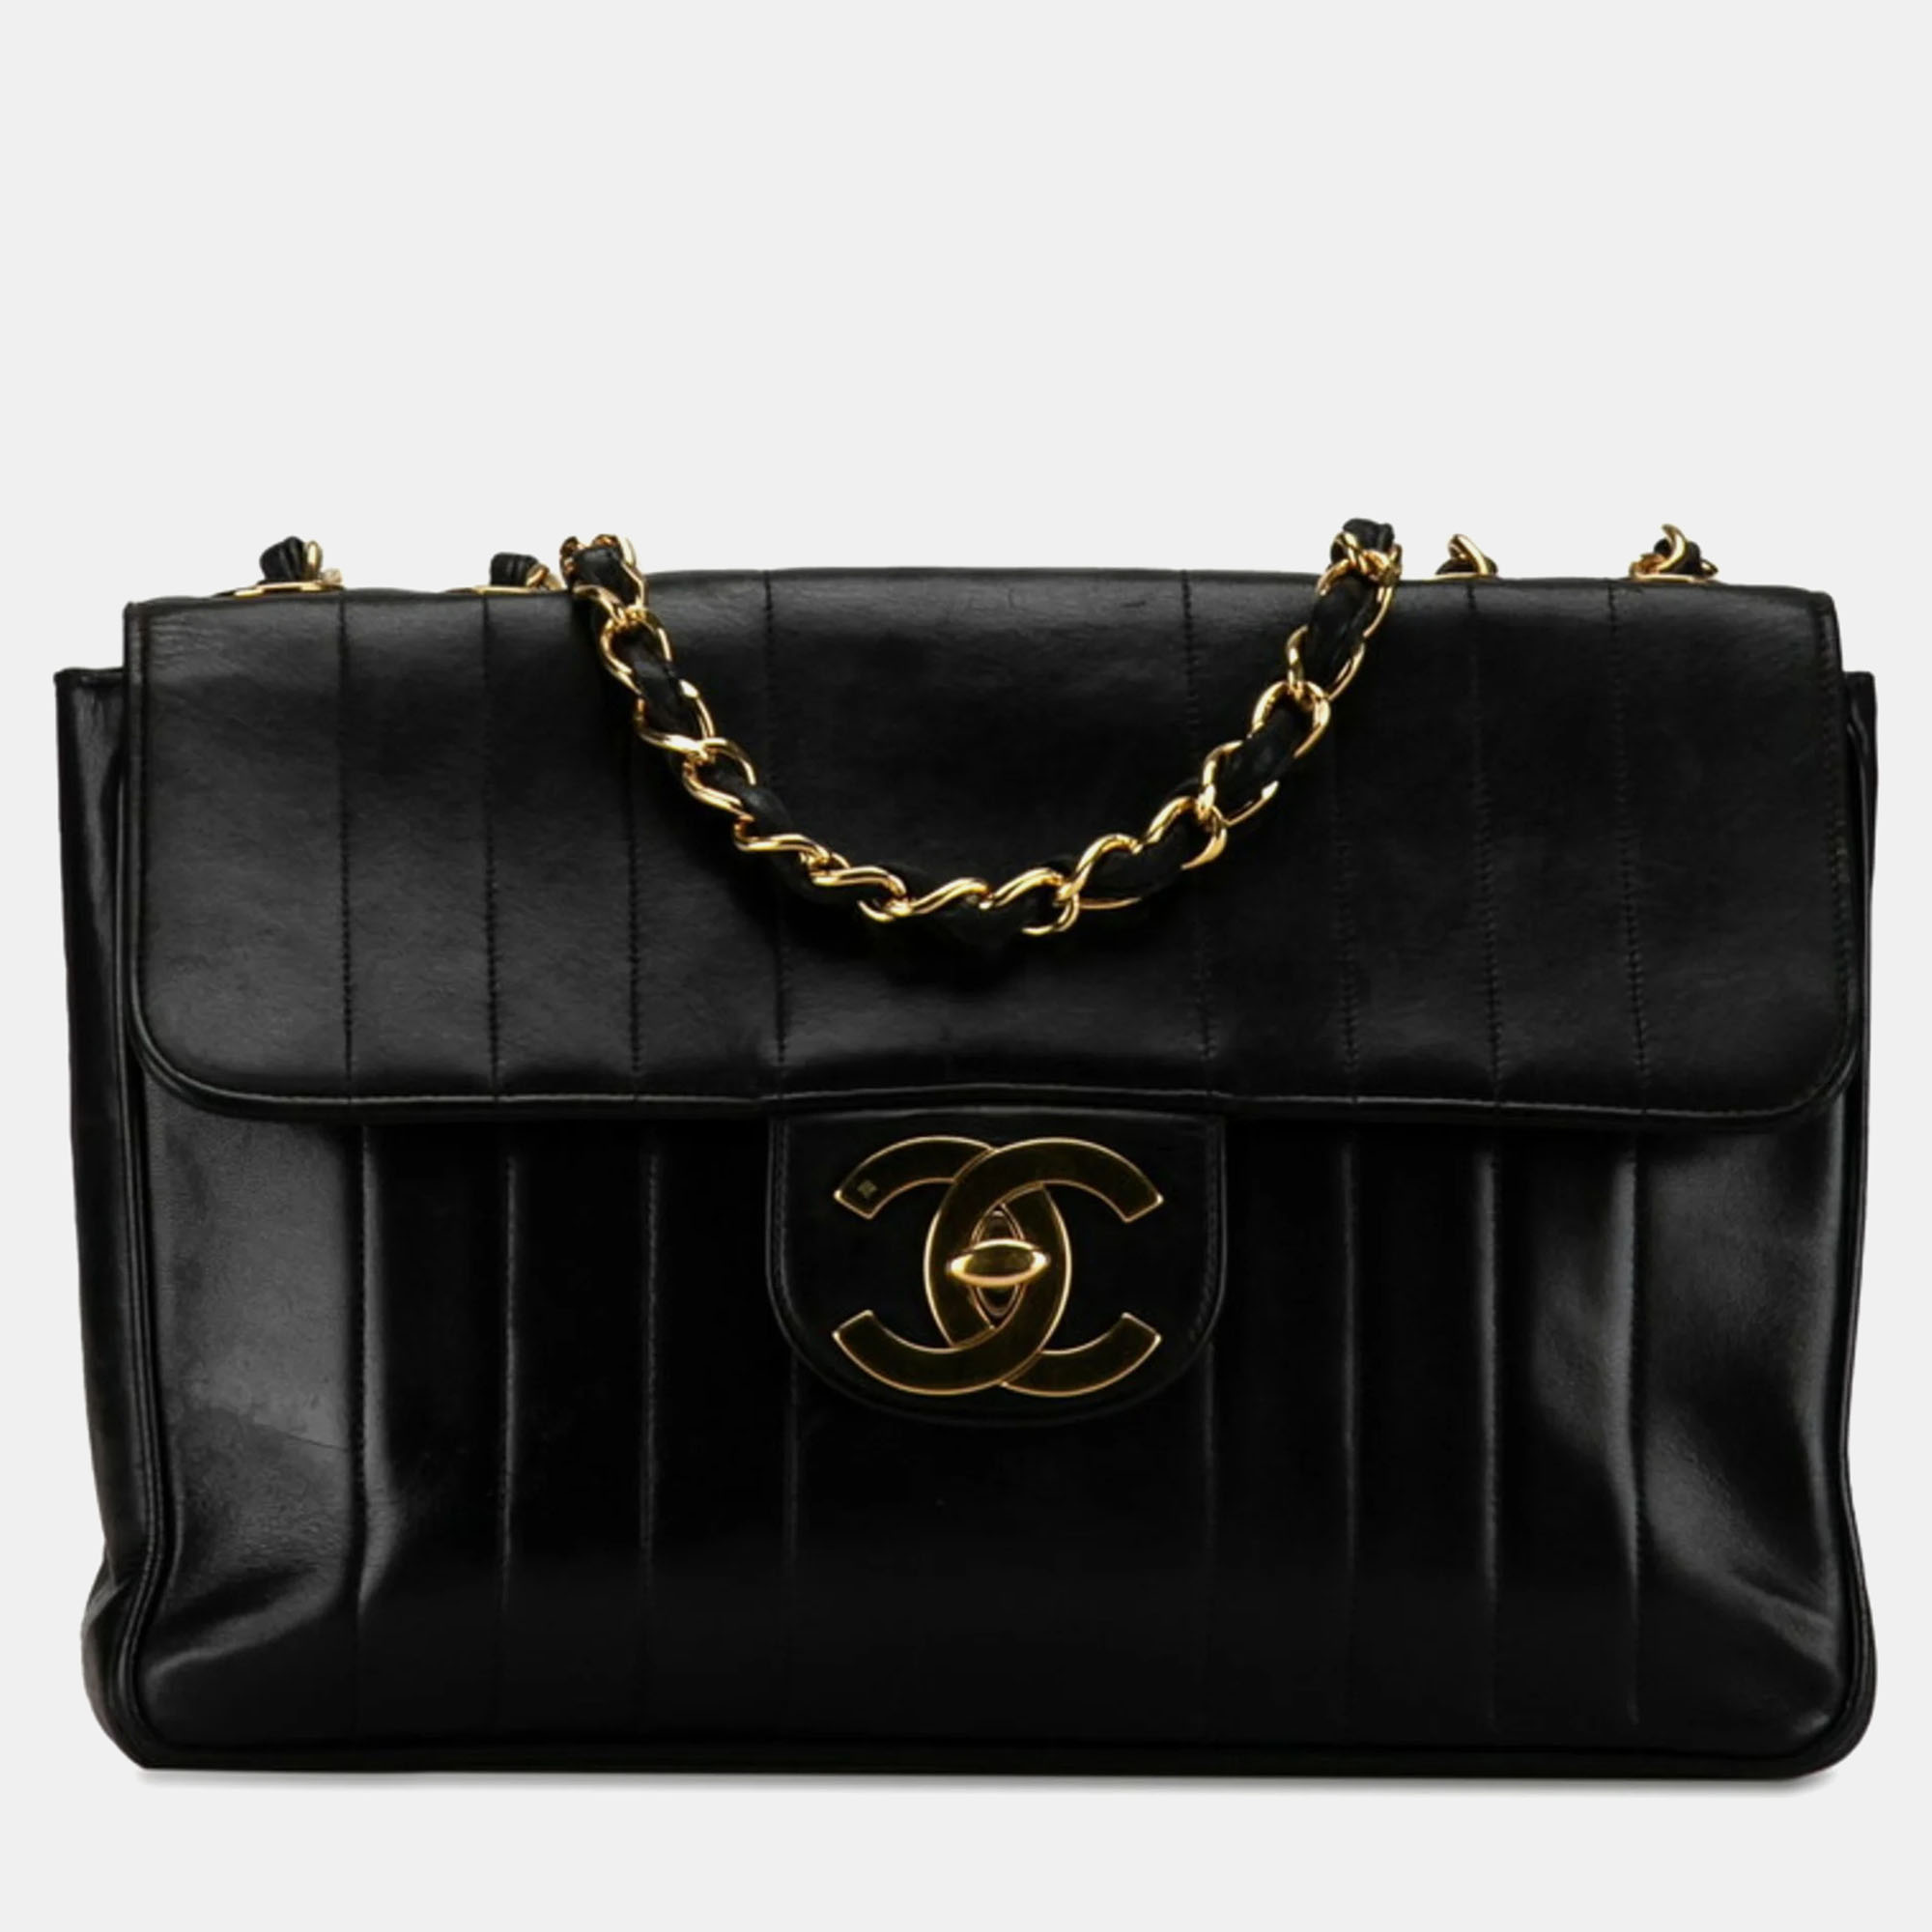 Chanel black vertical quilted leather jumbo classic flap shoulder bag